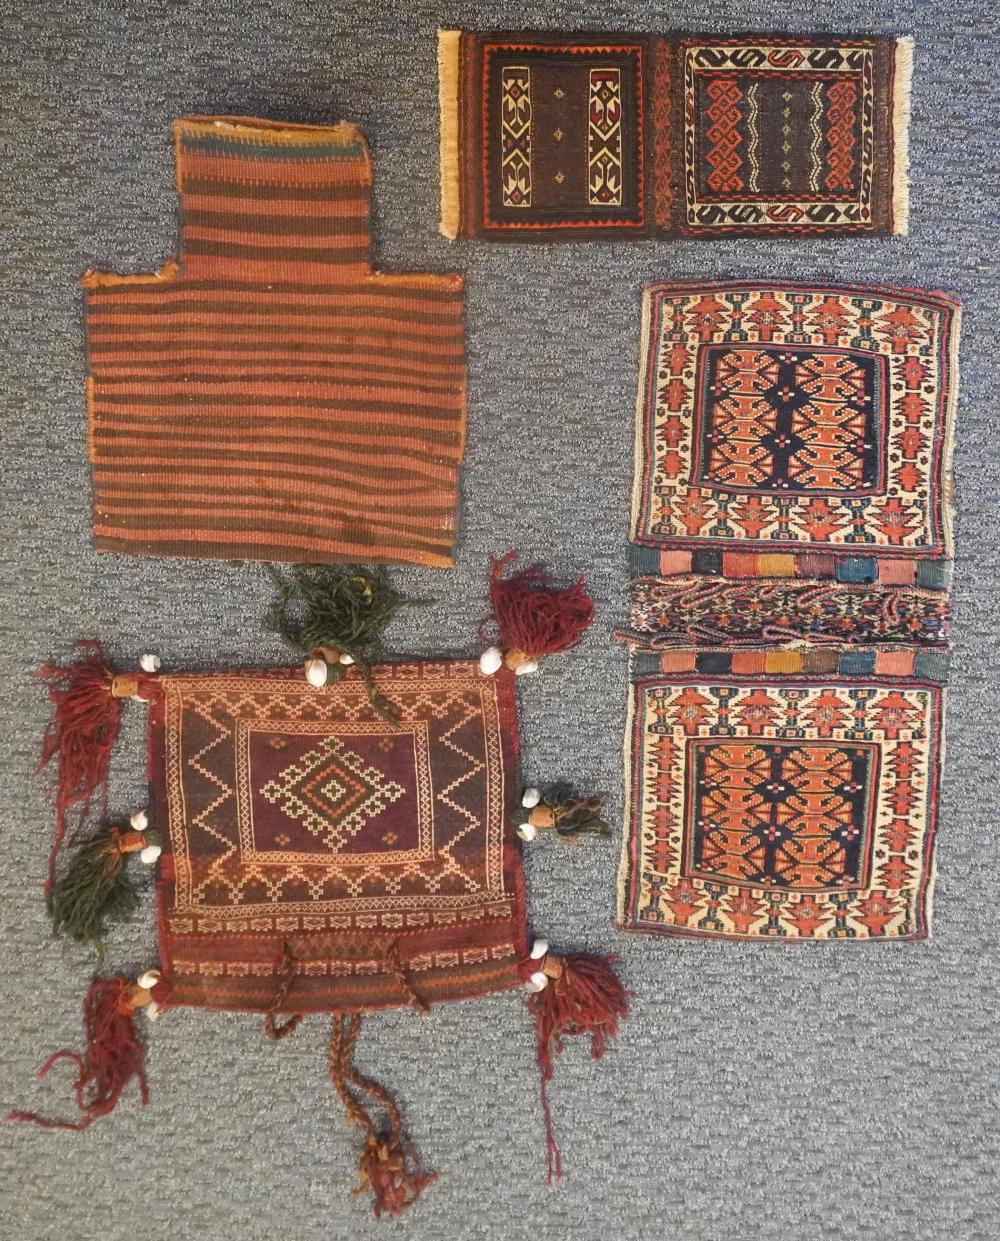 FOUR CENTRAL ASIAN BAGS/WALL HANGINGSFour